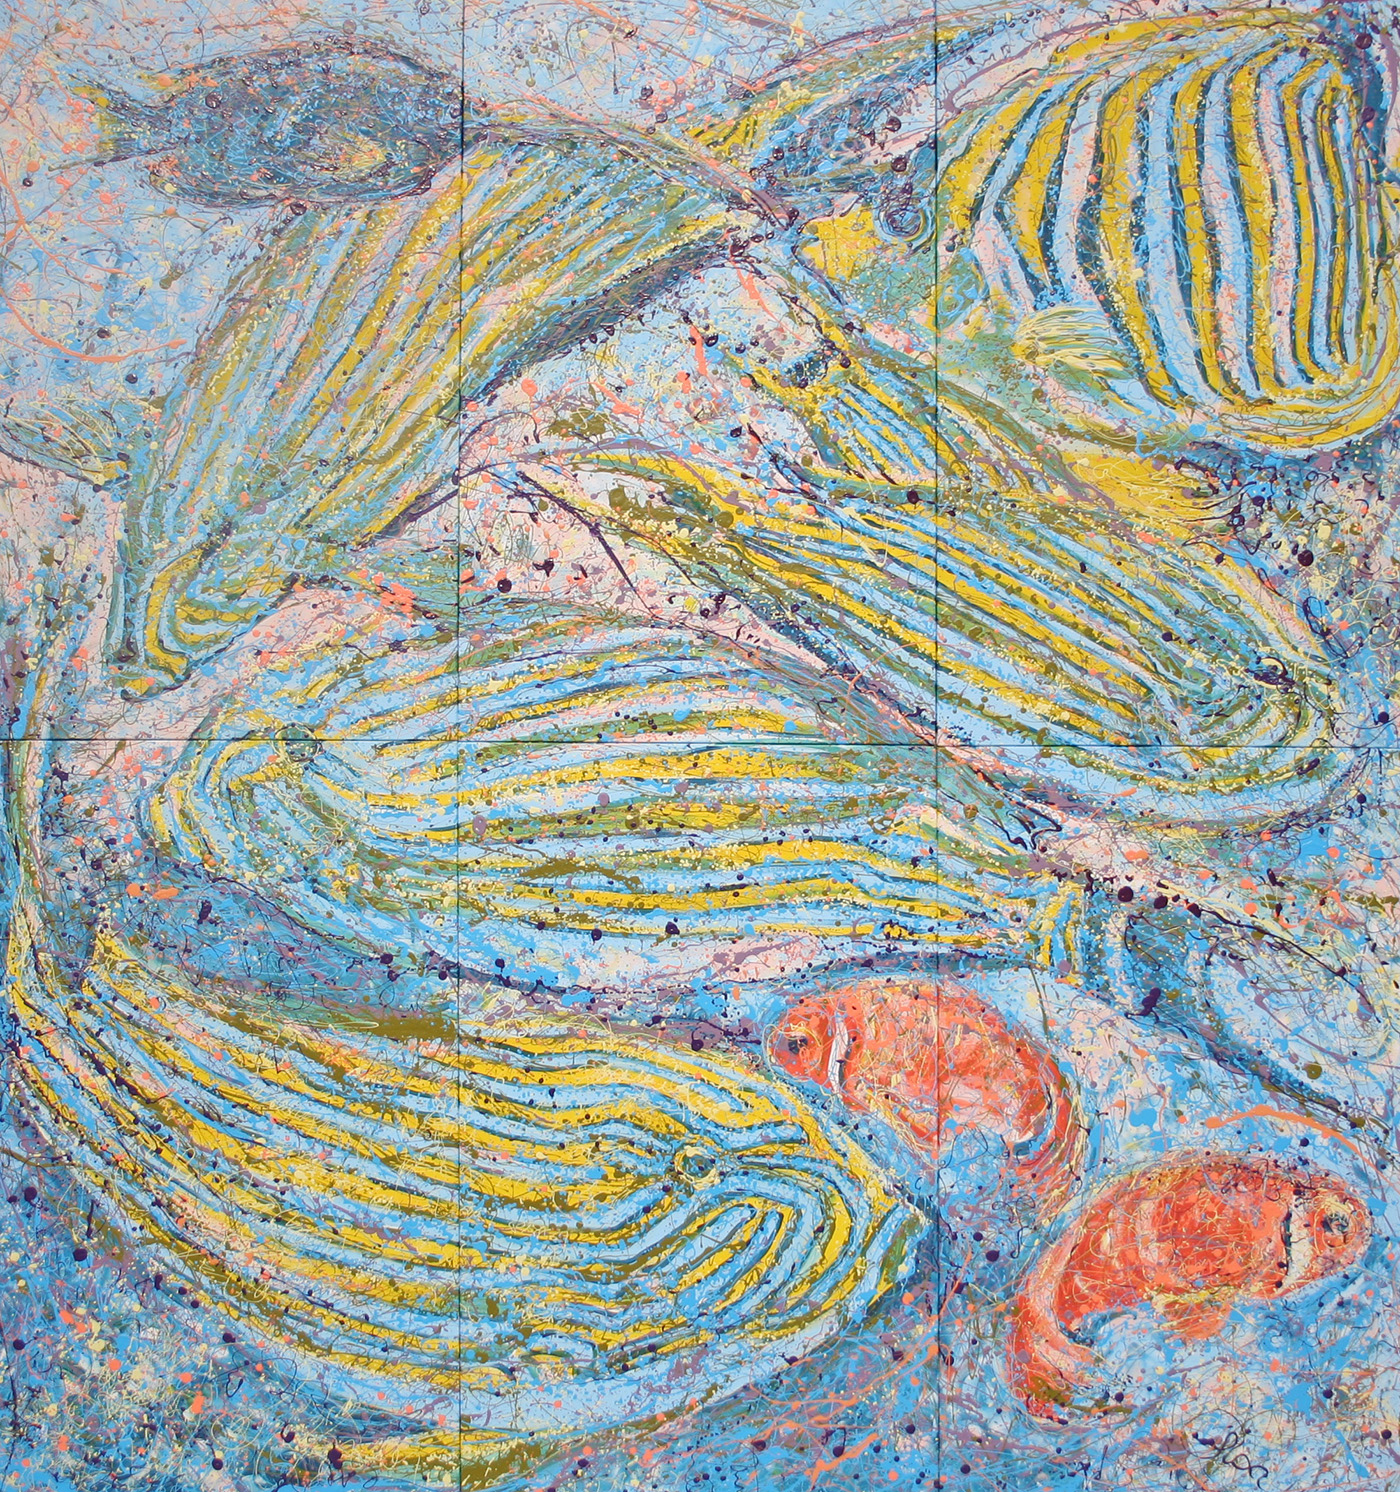 Pacific Snapper Latex Enamel Painting on Gallery Wrapped Canvas by Fort Collins, Colorado Artist Lisa Cameron Russell